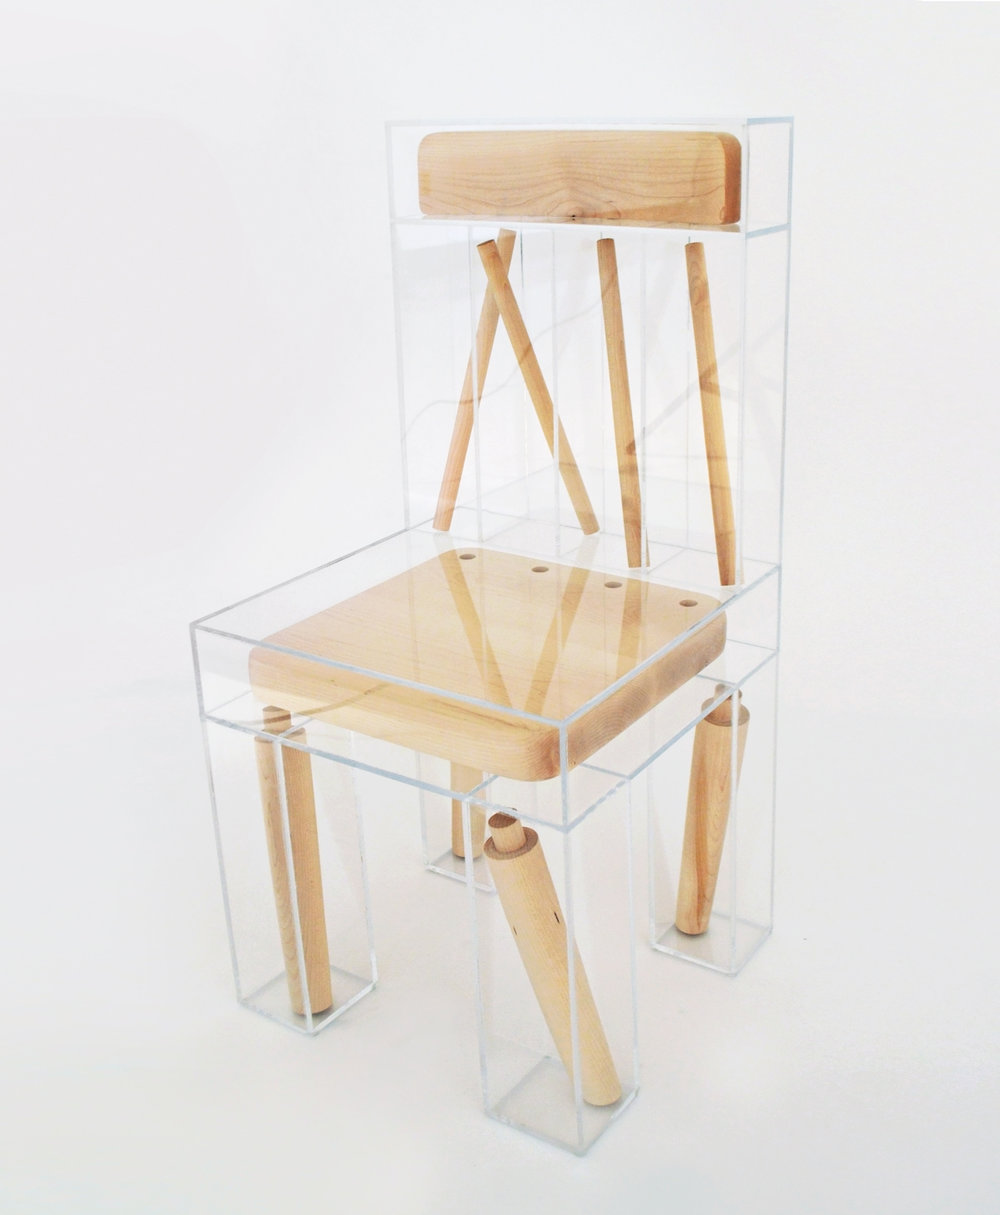 Exploded Chair An Intriguing And Interesting Furniture Design By Joyce Lin 1